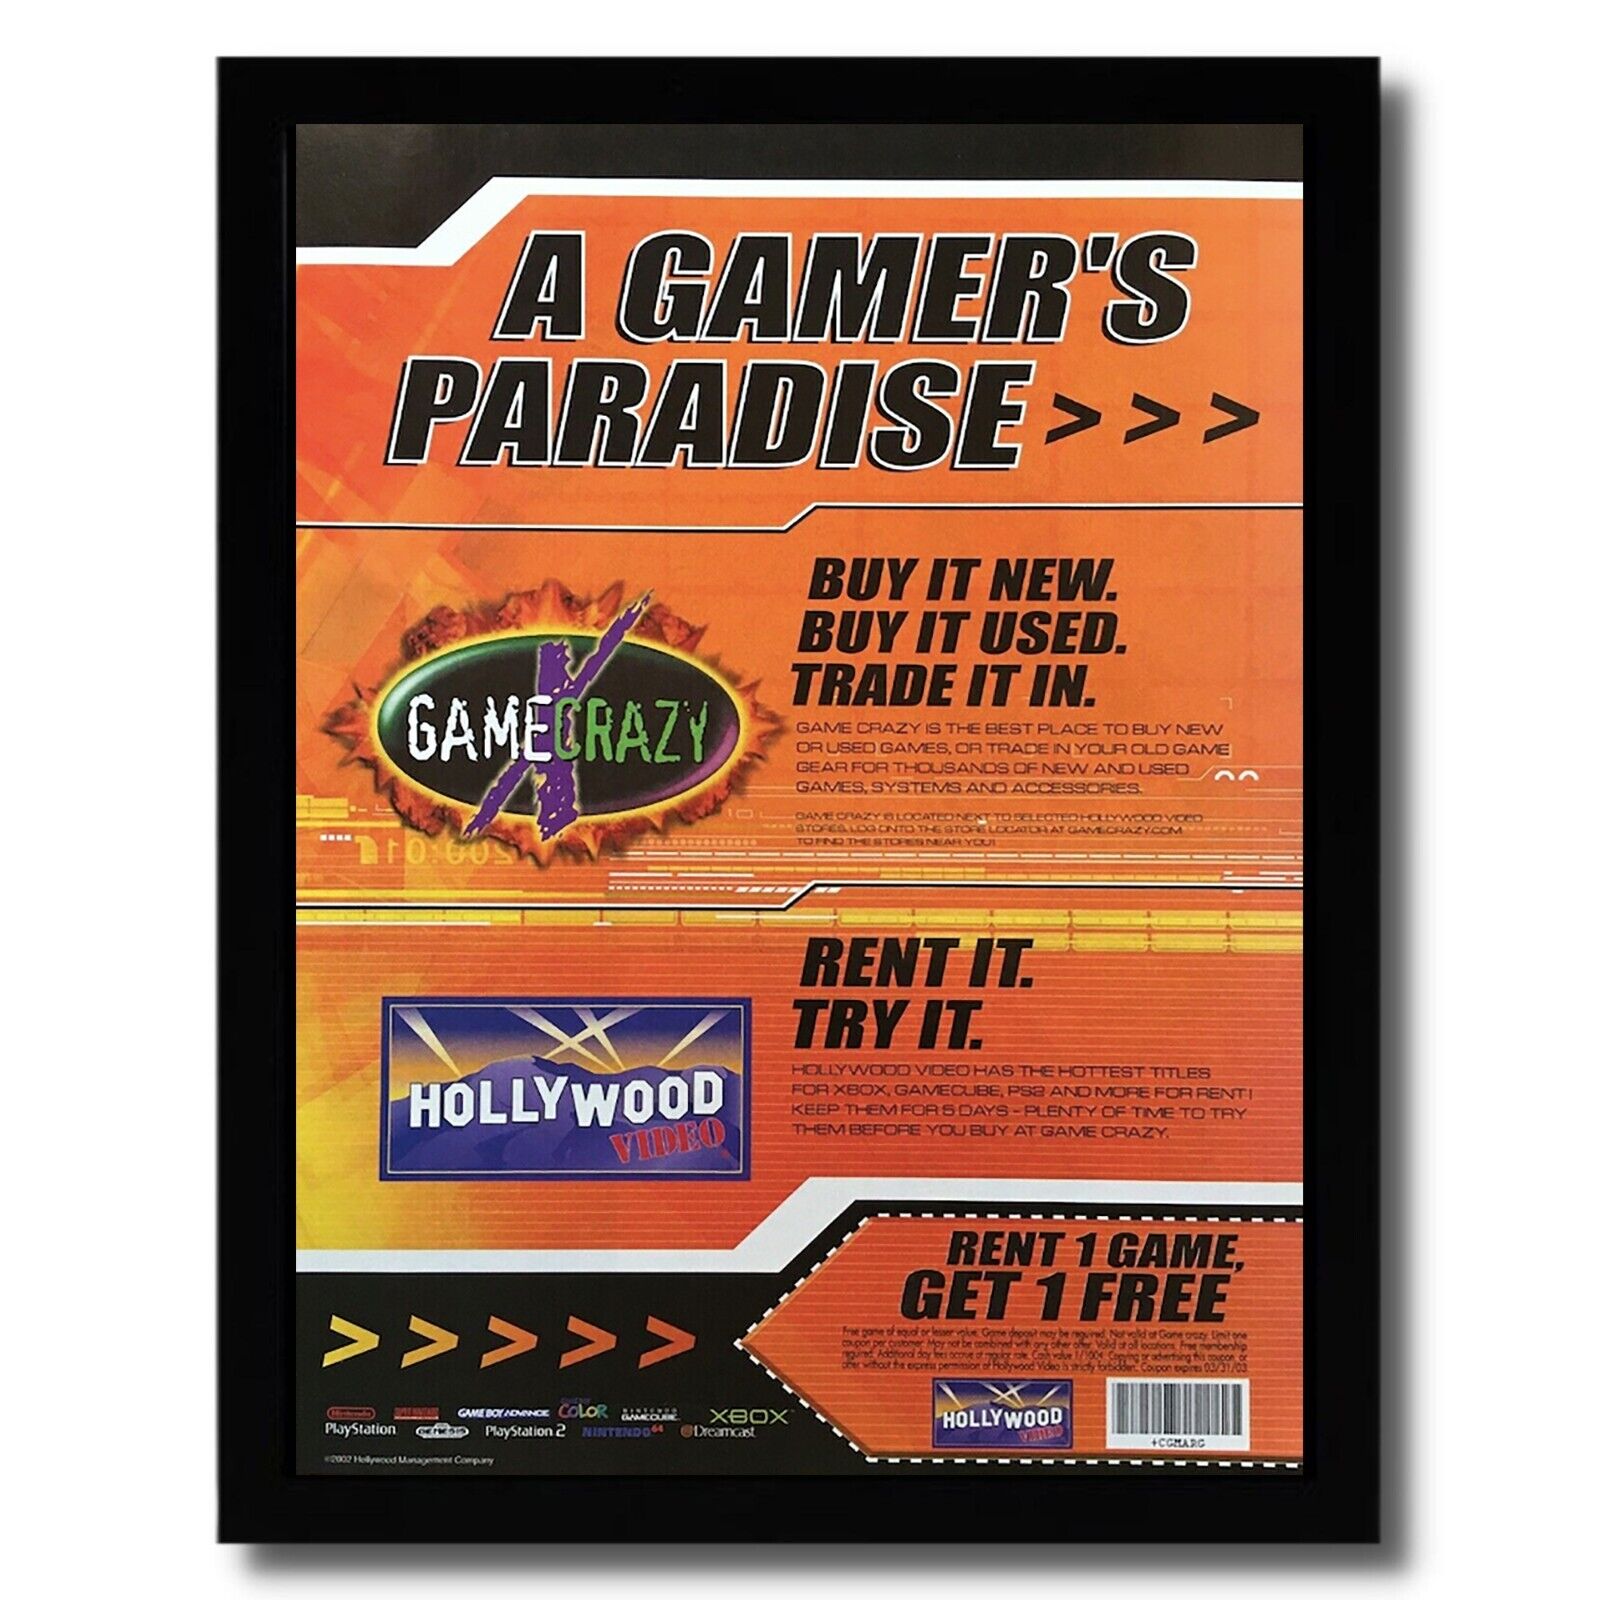 2002 GAME CRAZY / HOLLYWOOD VIDEO Framed Print Ad/Poster Video Game Rentals Art